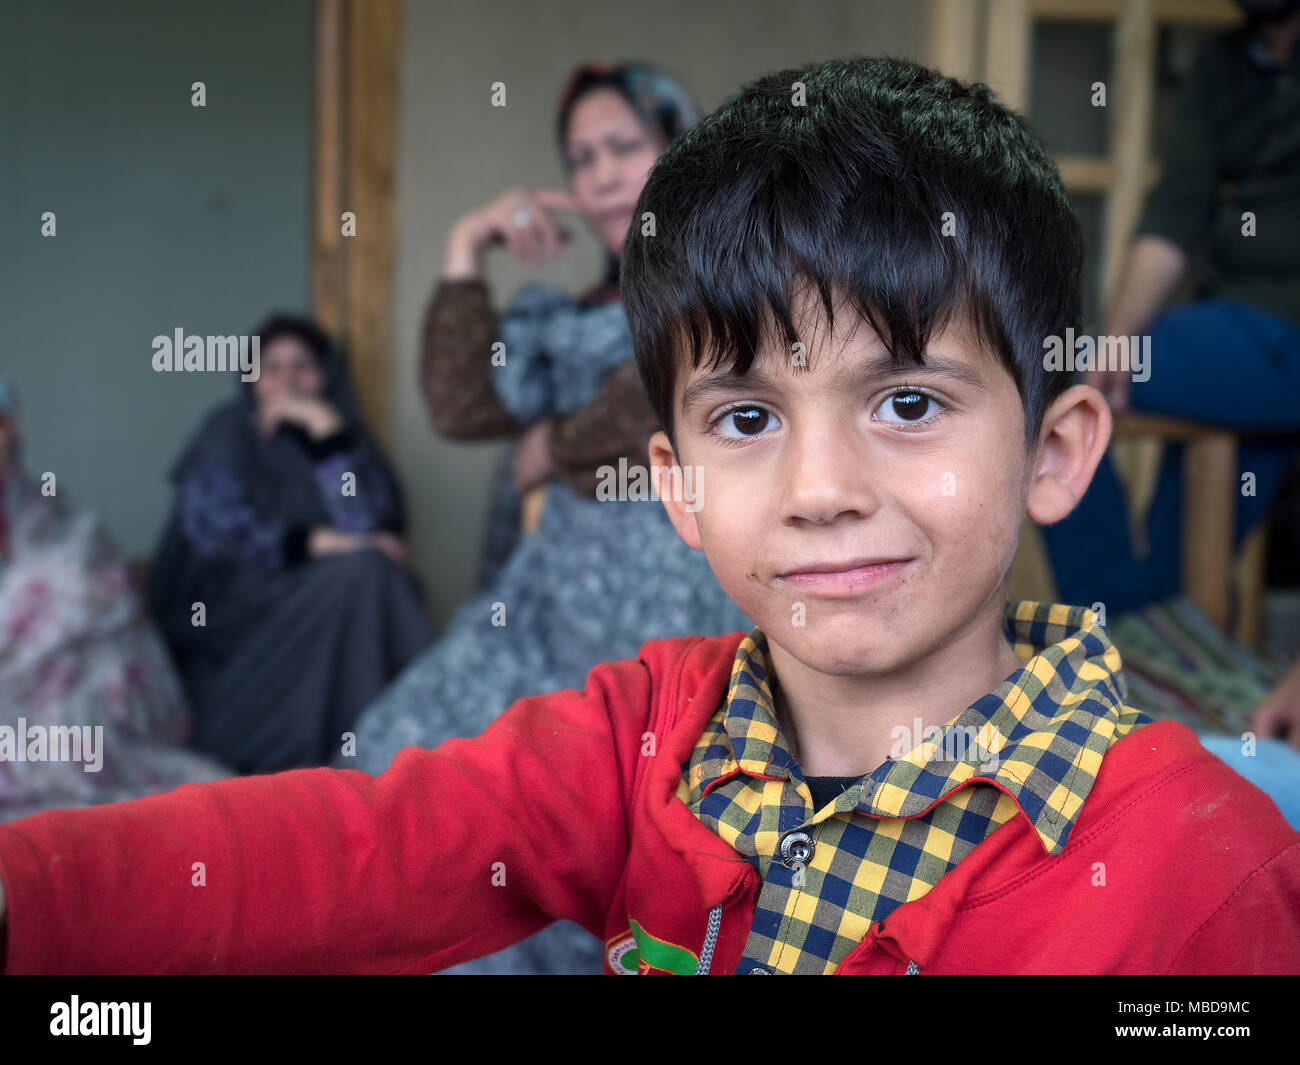 Kang, Iran - July 30, 2016 : portrait of an iranian child with his family in background Stock Photo